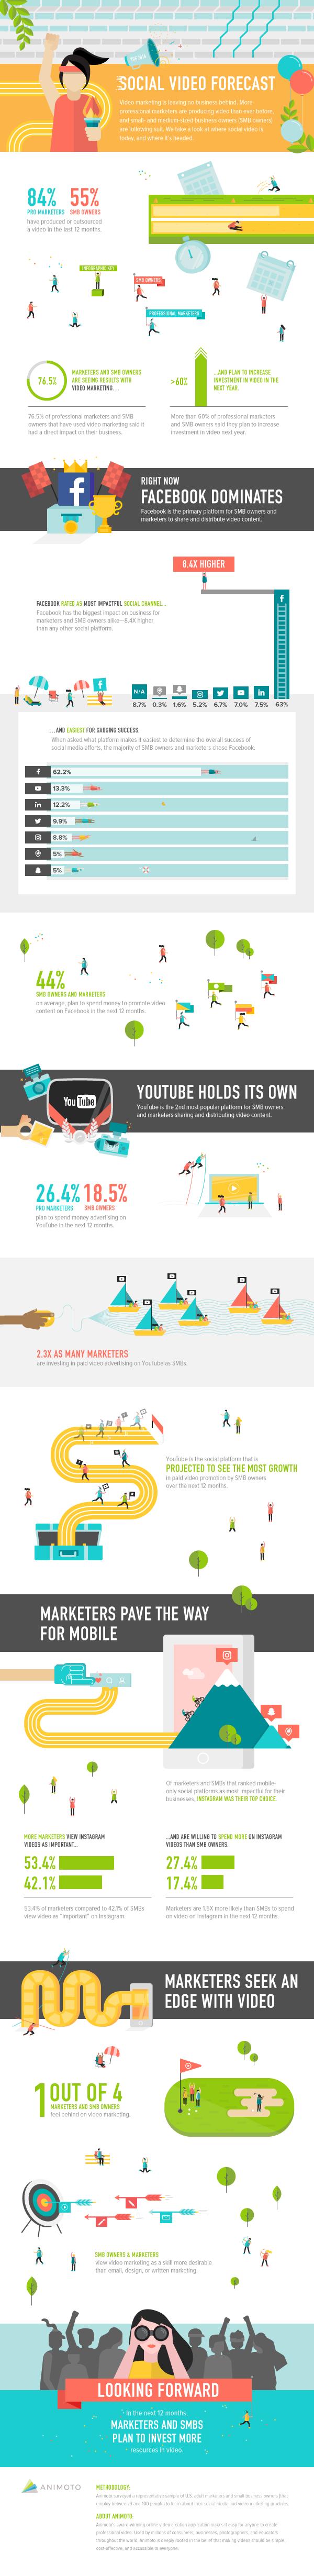 wersm-the-2016-social-video-forecast-infographic